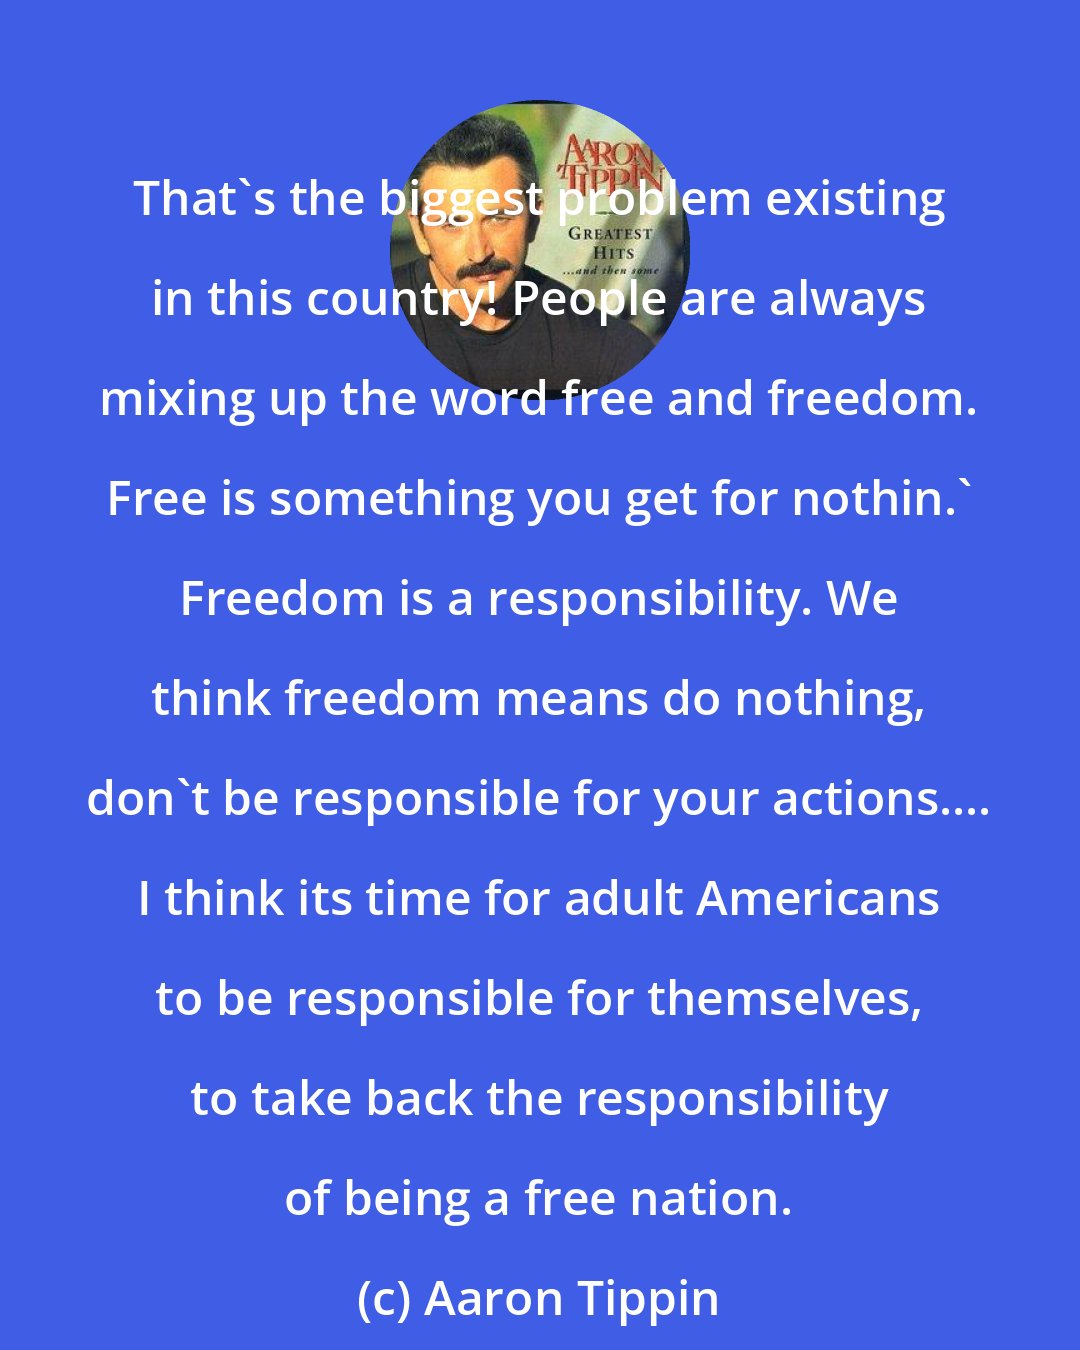 Aaron Tippin: That's the biggest problem existing in this country! People are always mixing up the word free and freedom. Free is something you get for nothin.' Freedom is a responsibility. We think freedom means do nothing, don't be responsible for your actions.... I think its time for adult Americans to be responsible for themselves, to take back the responsibility of being a free nation.